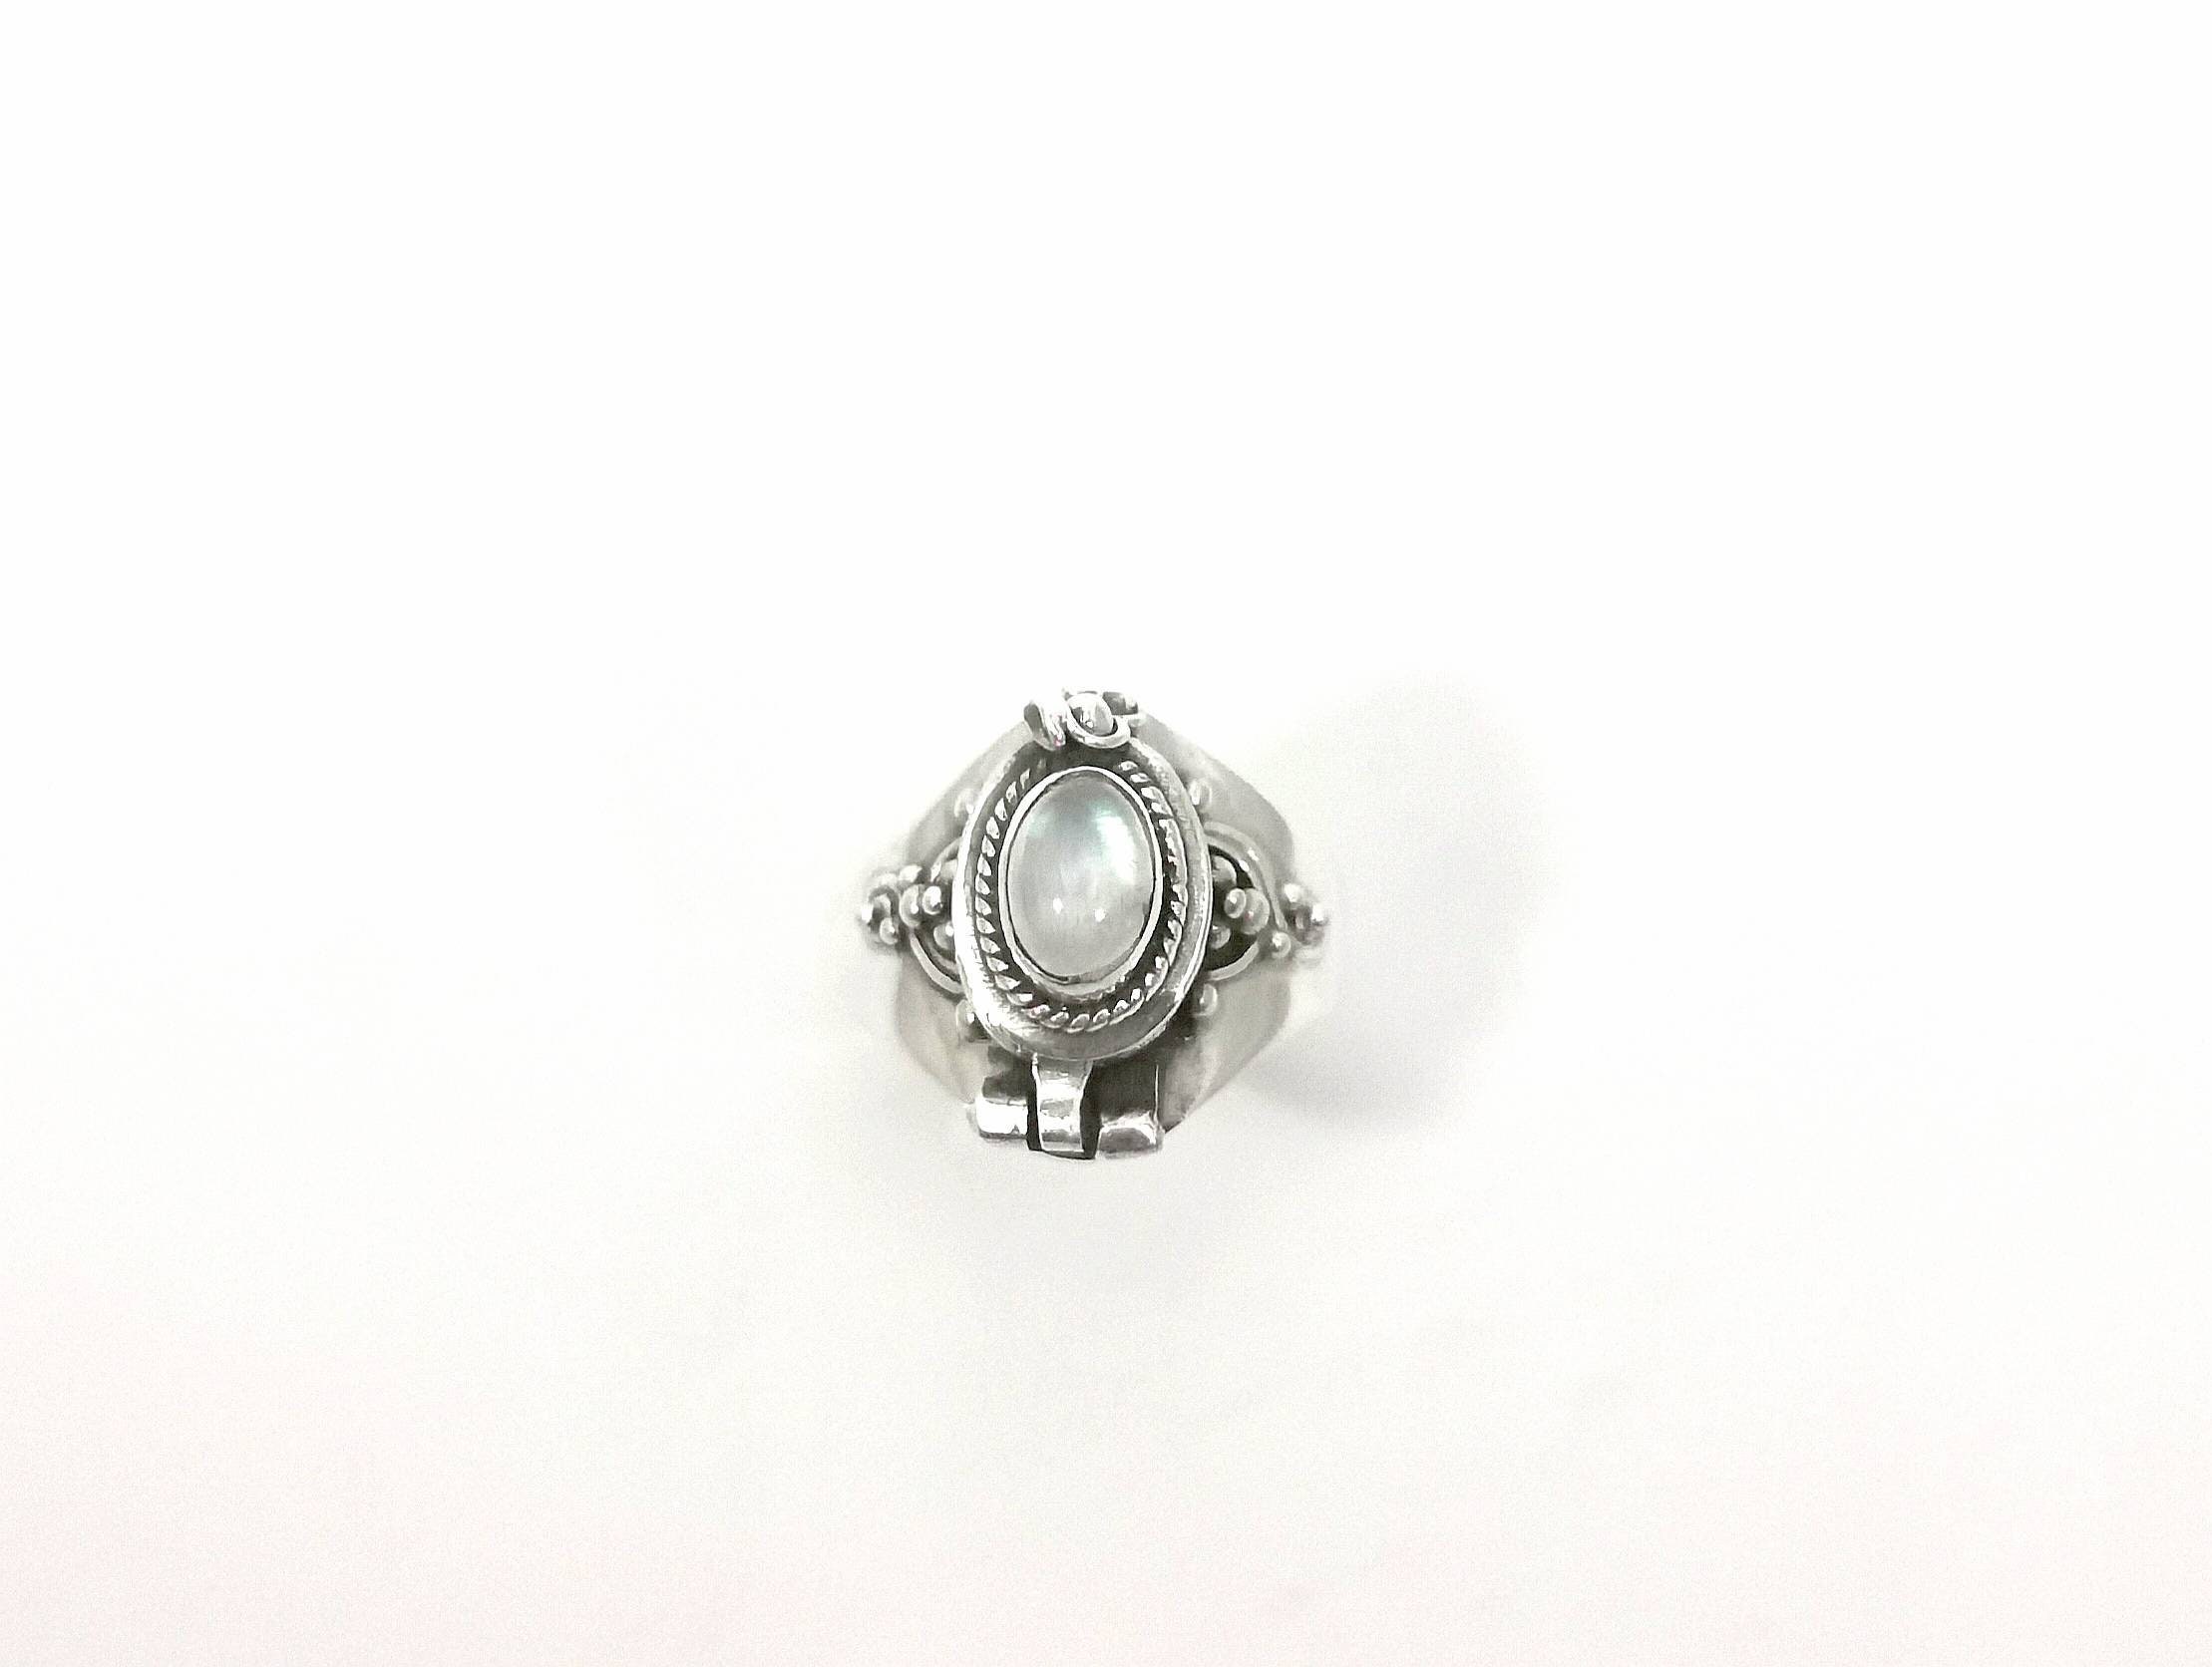 Roman Poison Ring 925 Silver, Ring with Secret chamber